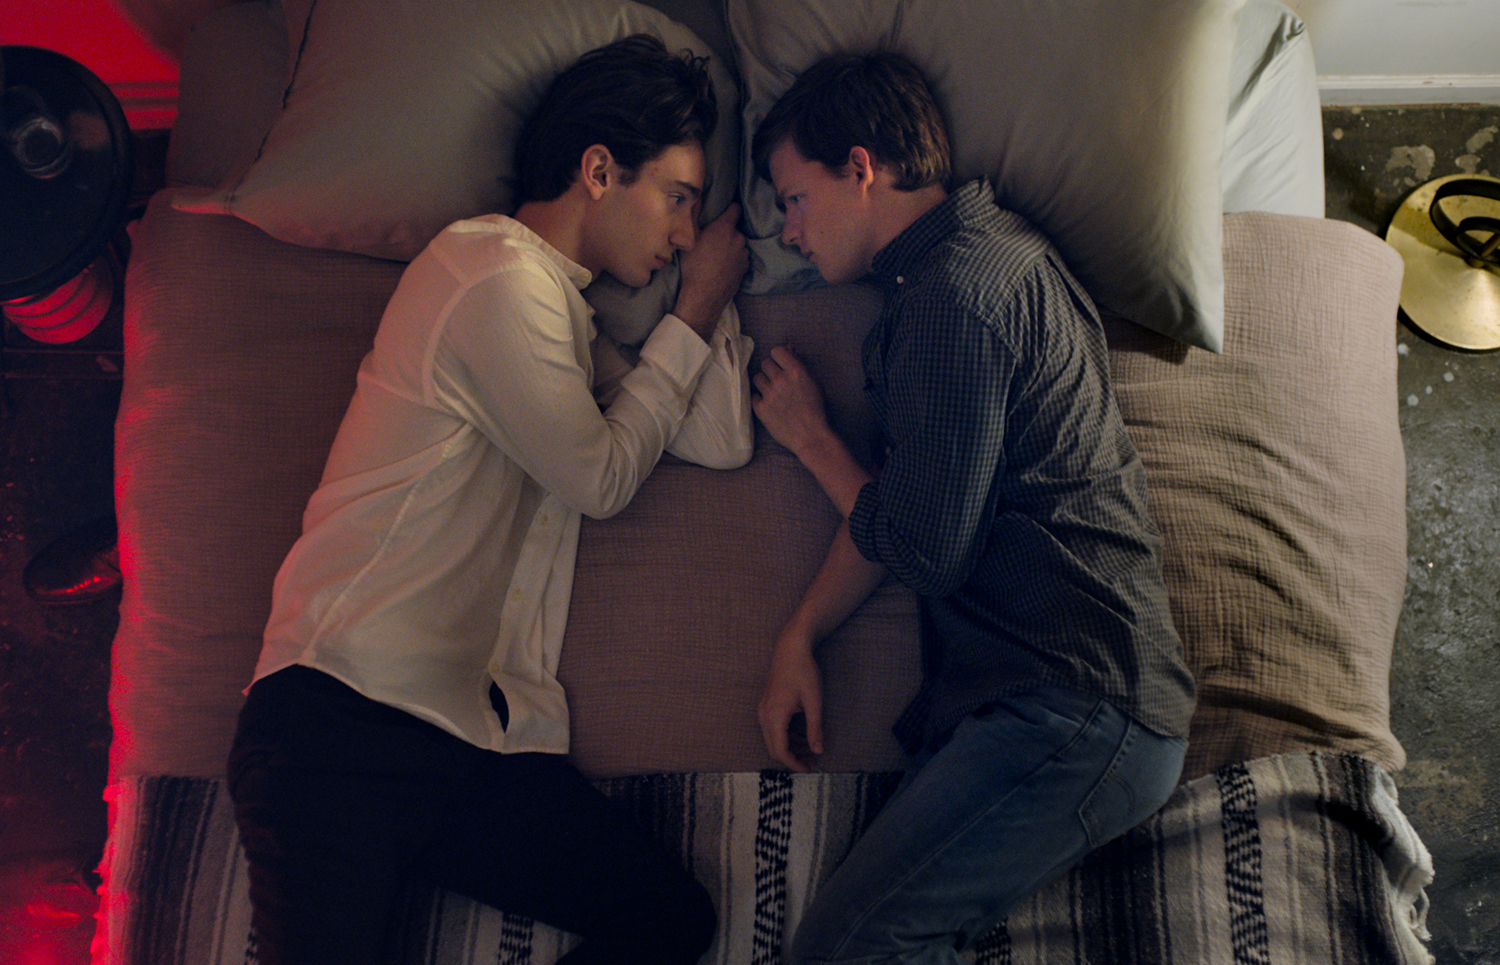 Theodore Pellerin stars as “Xavier” and Lucas Hedges stars as “Jared” in Joel Edgerton’s BOY ERASED, a Focus Features release.